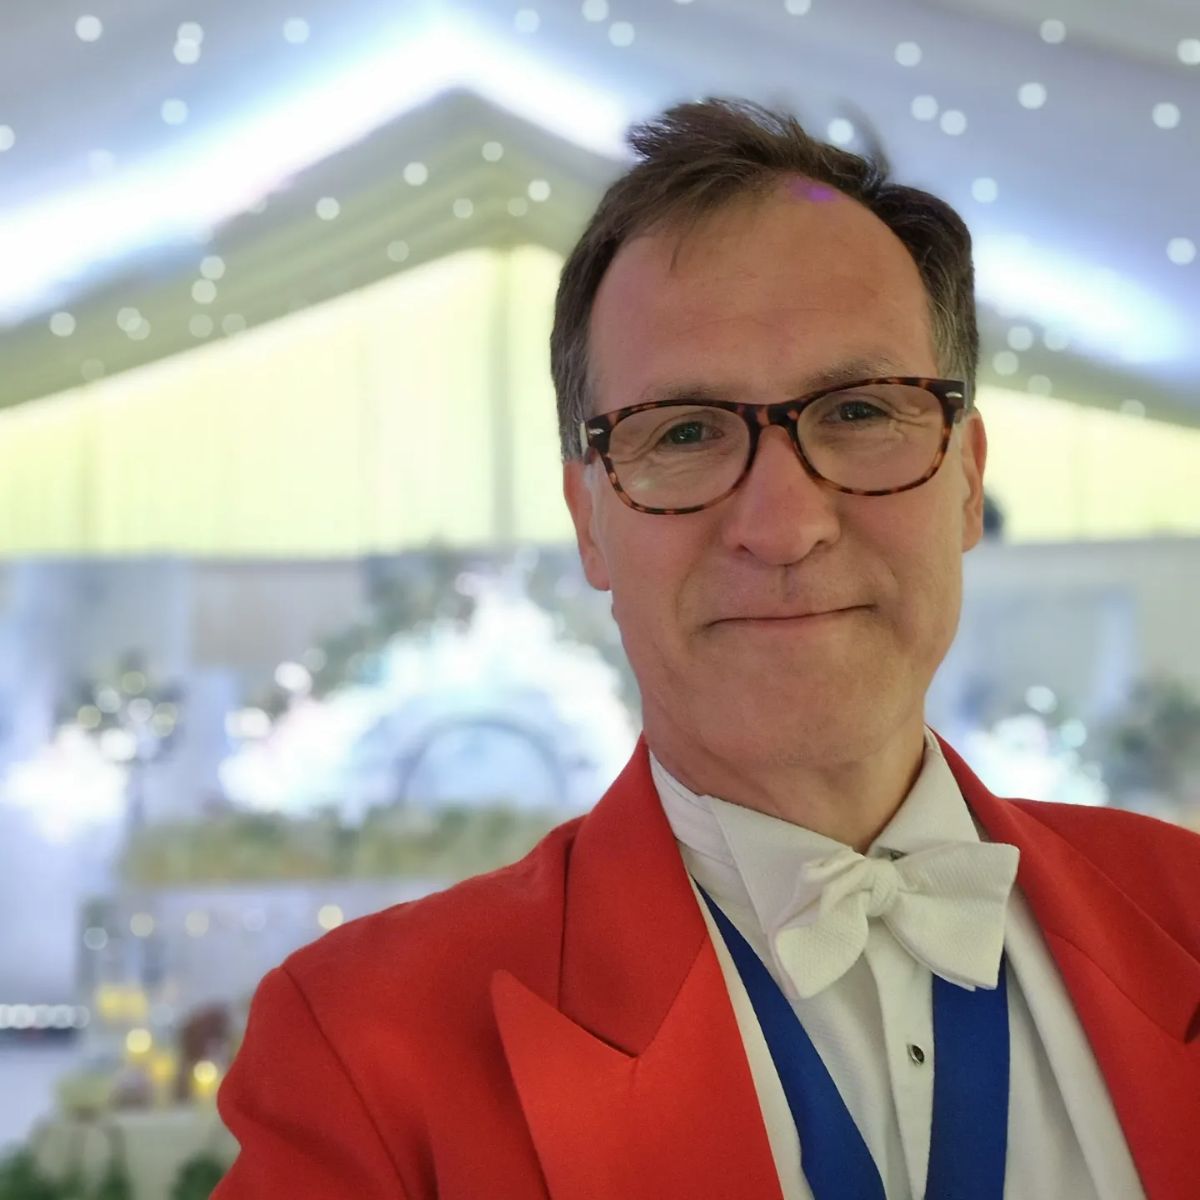 The Man in the Red Coat - Toastmaster James Hasler-Image-64